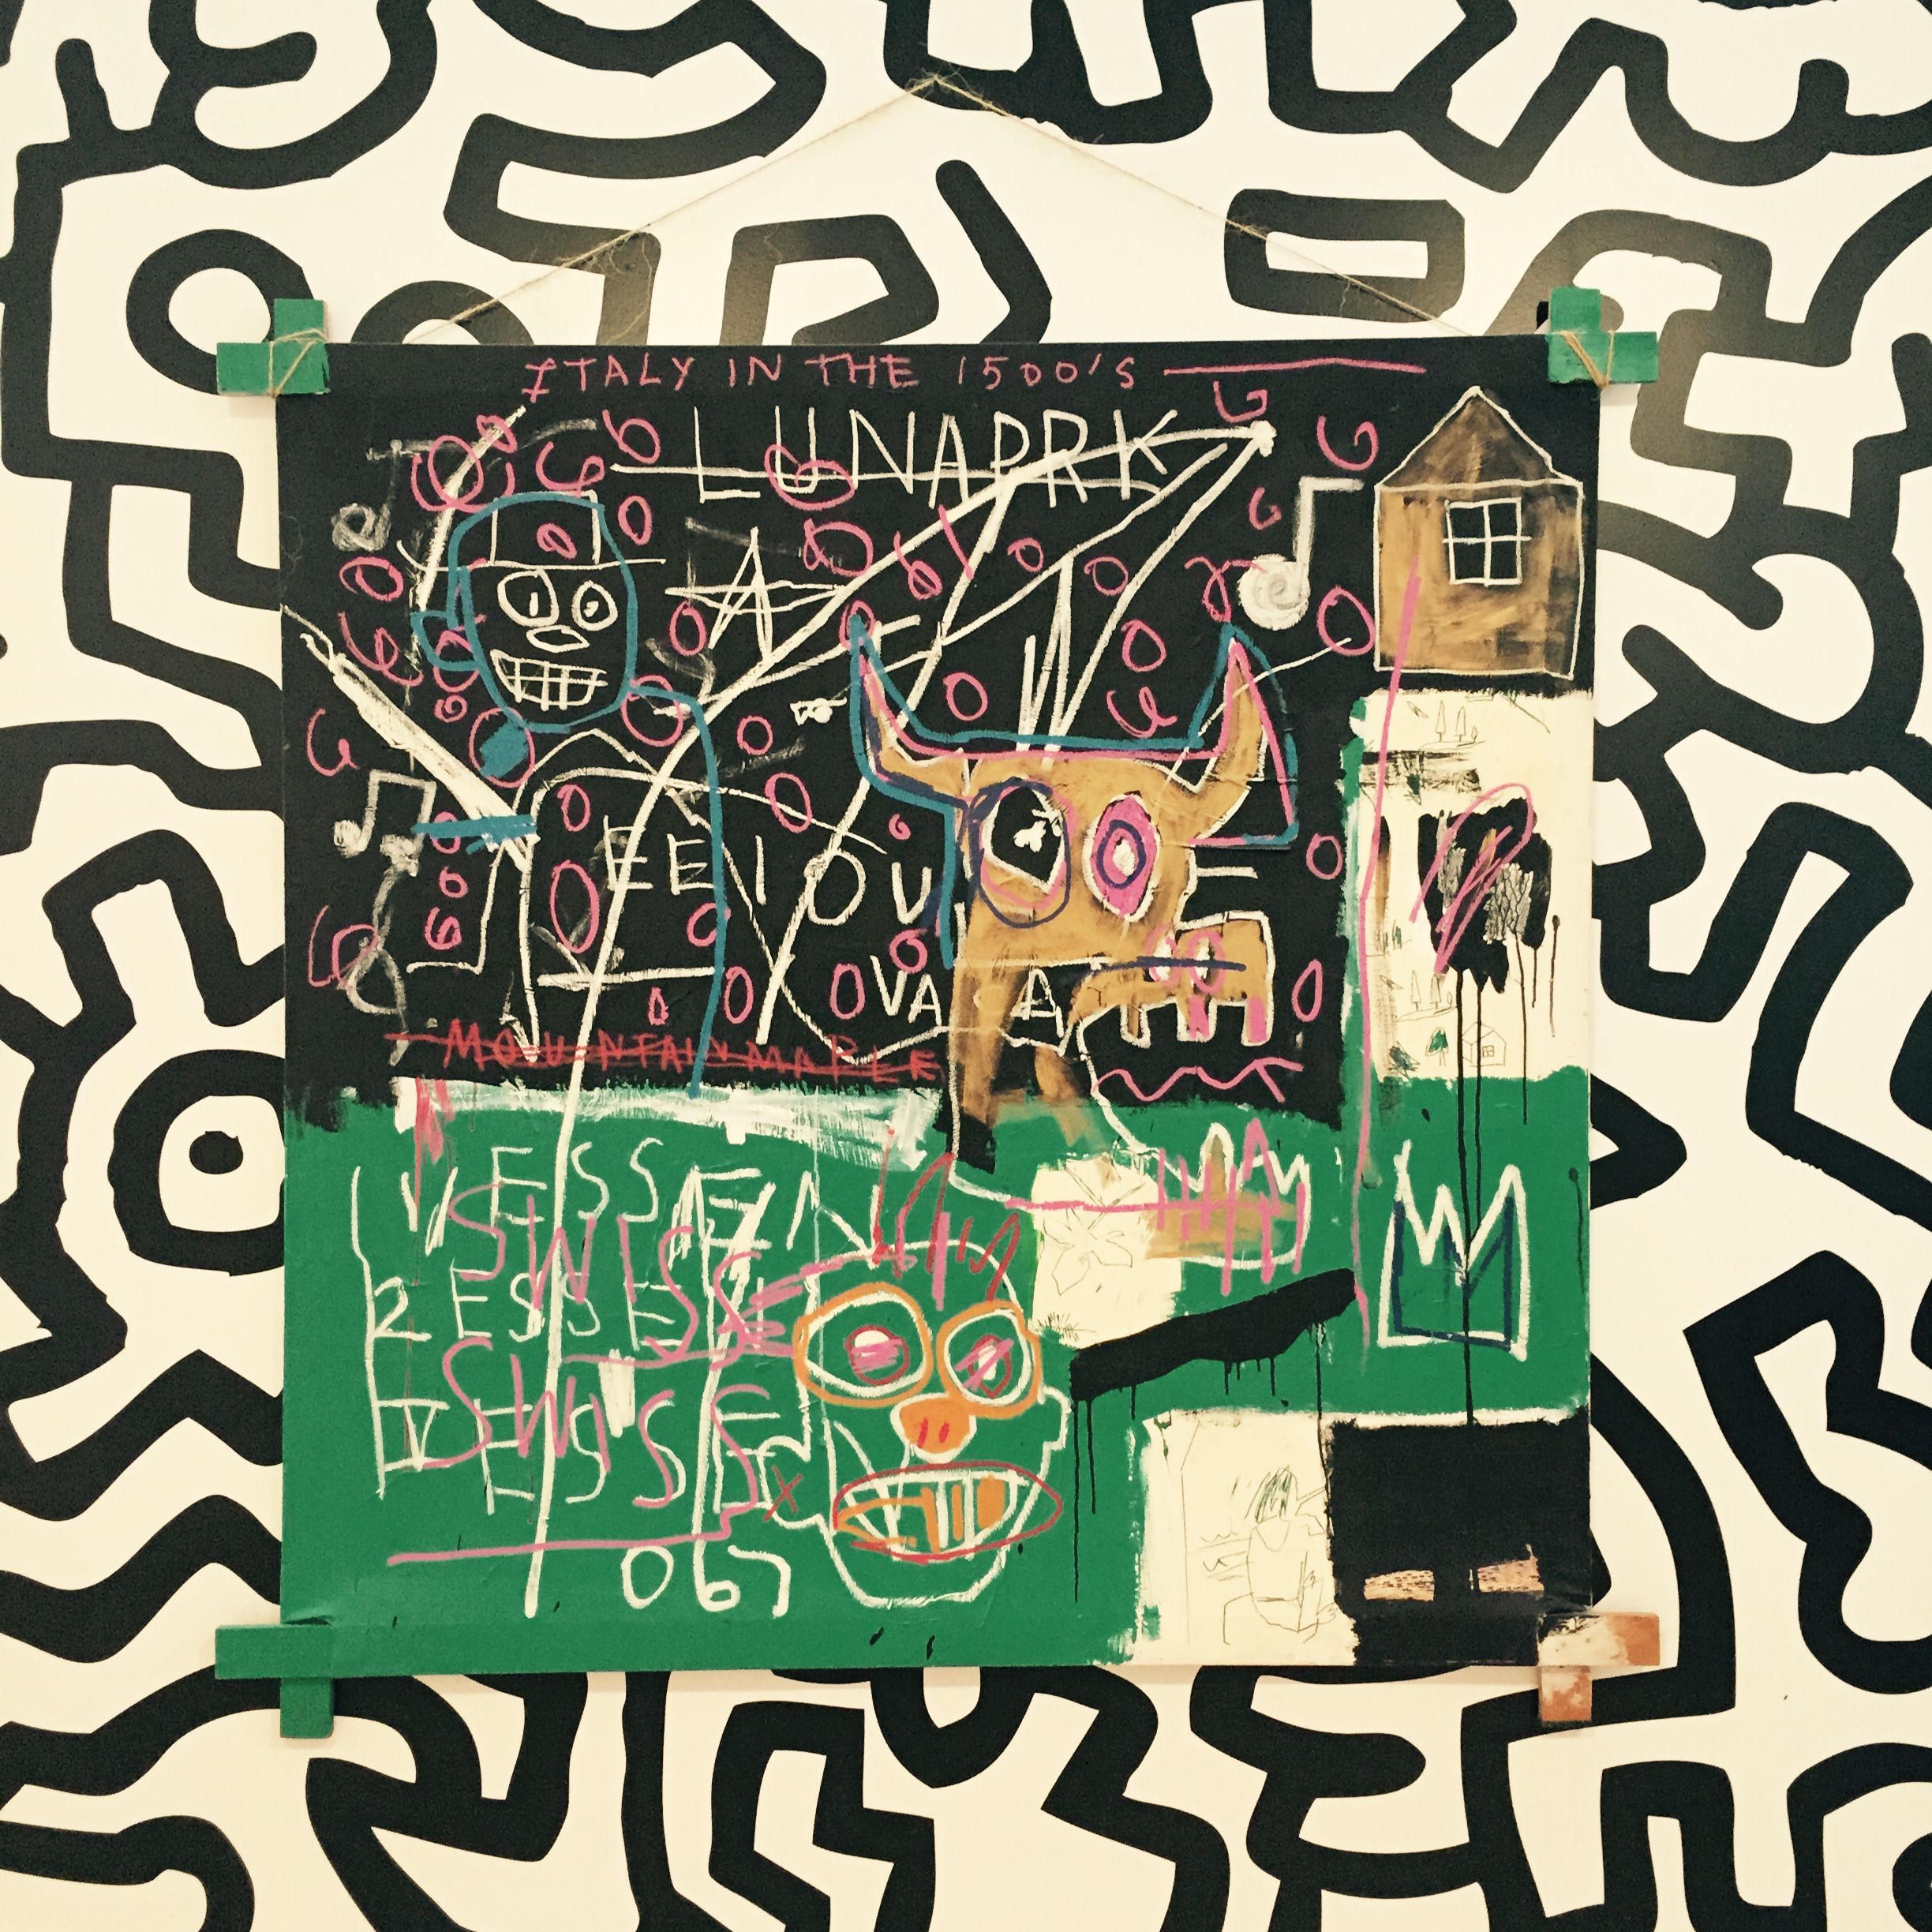 Basquiat Painting On Keith Haring Wallpaper, The Whitney - Jean Michel Basquiat Lnaprk , HD Wallpaper & Backgrounds